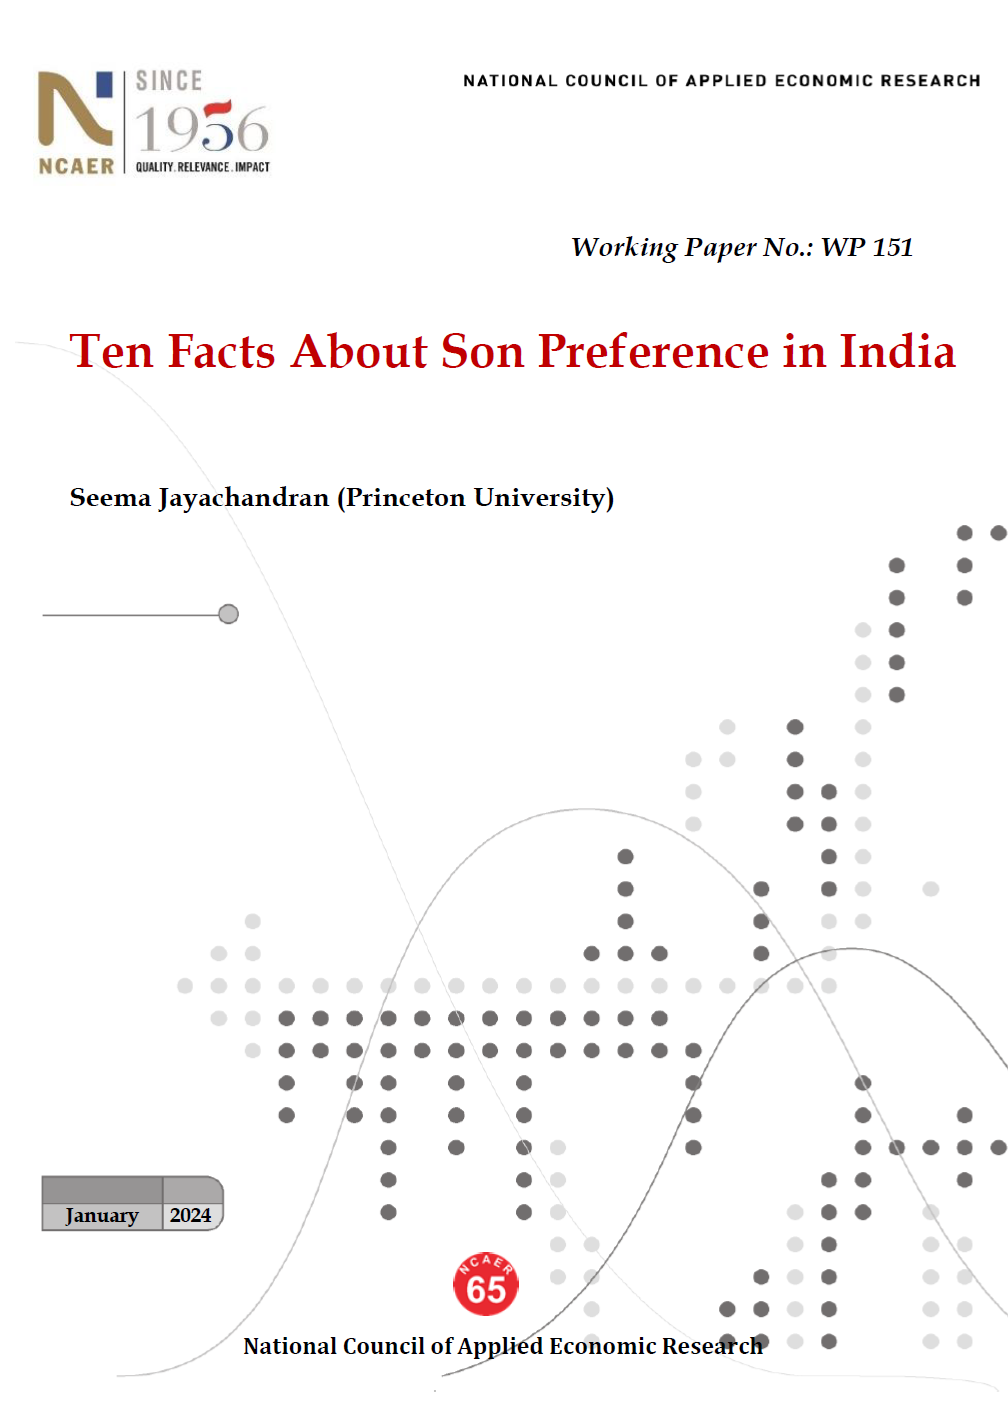 Ten Facts About Son Preference in India